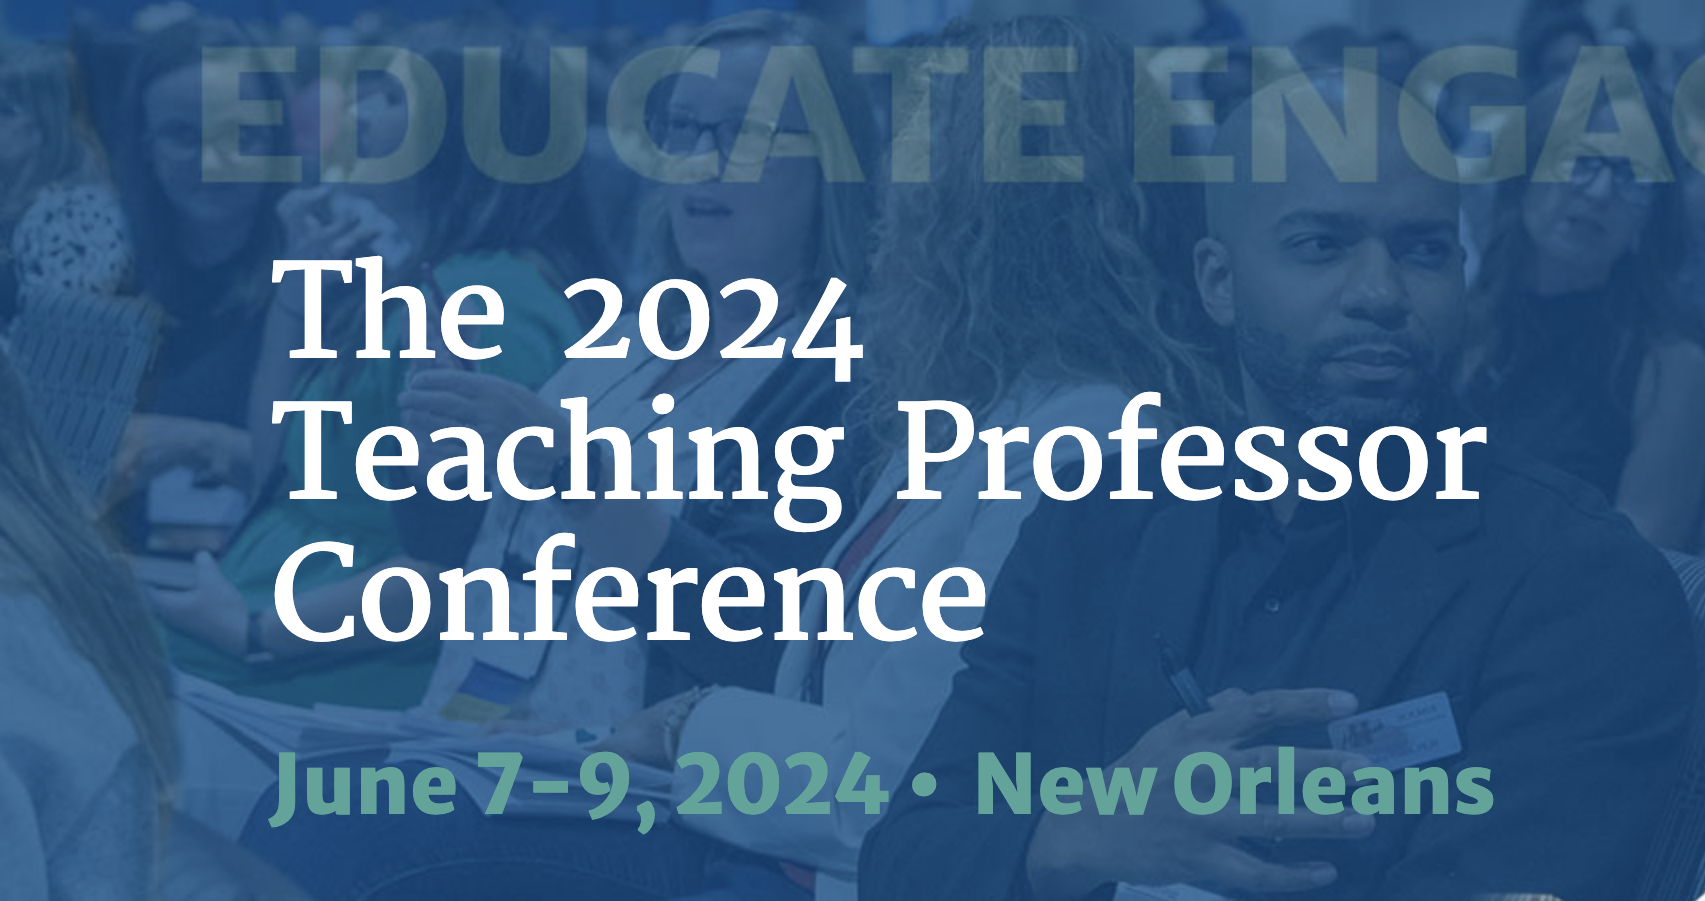 The 2024 Teaching Professor Conference image, two women sitting and smiling on the blue background.